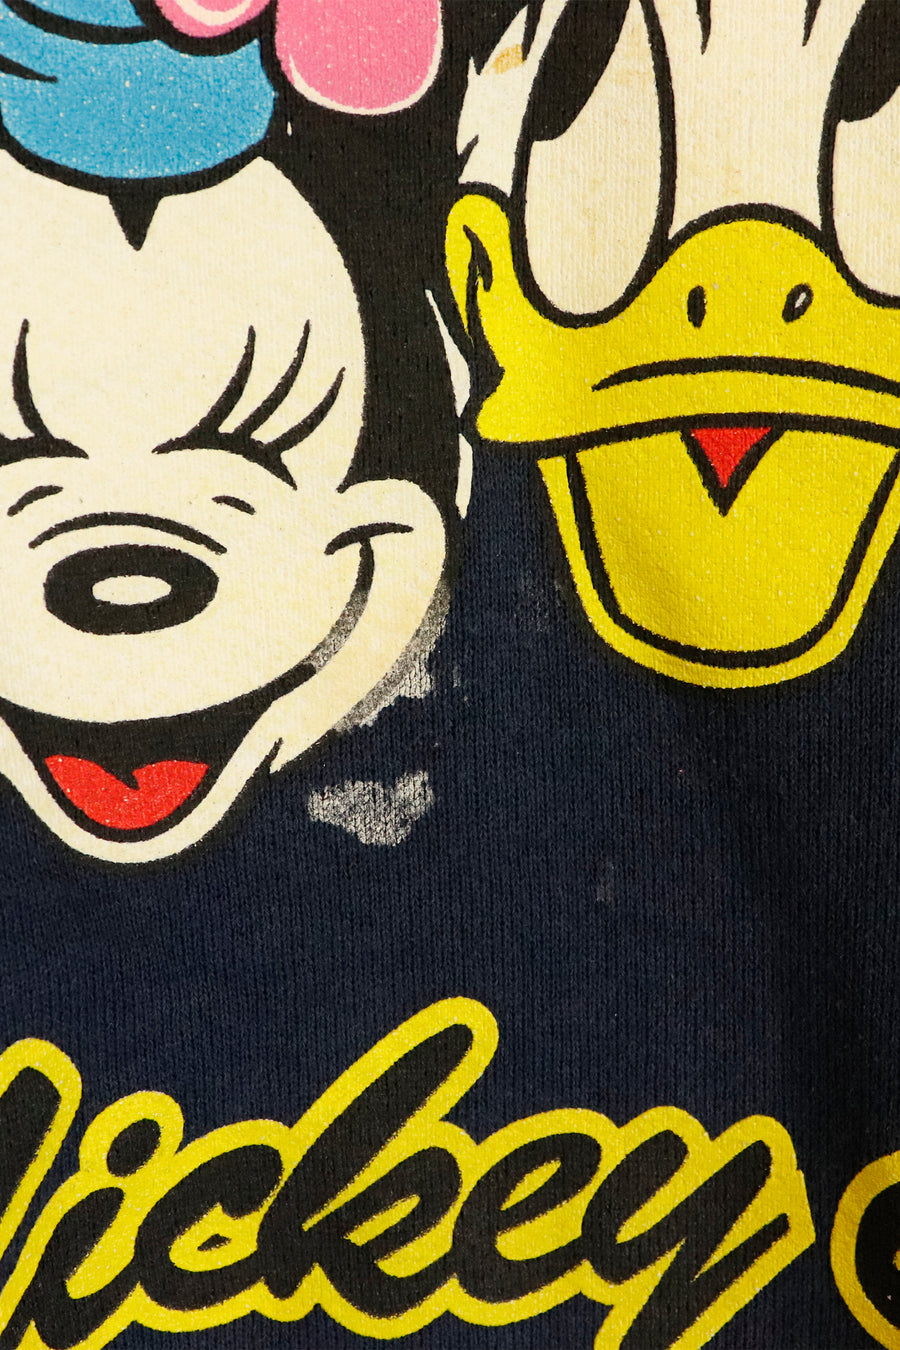 Vintage Mickey And Co Characters In A Line Crewneck Sweatshirt Sz L